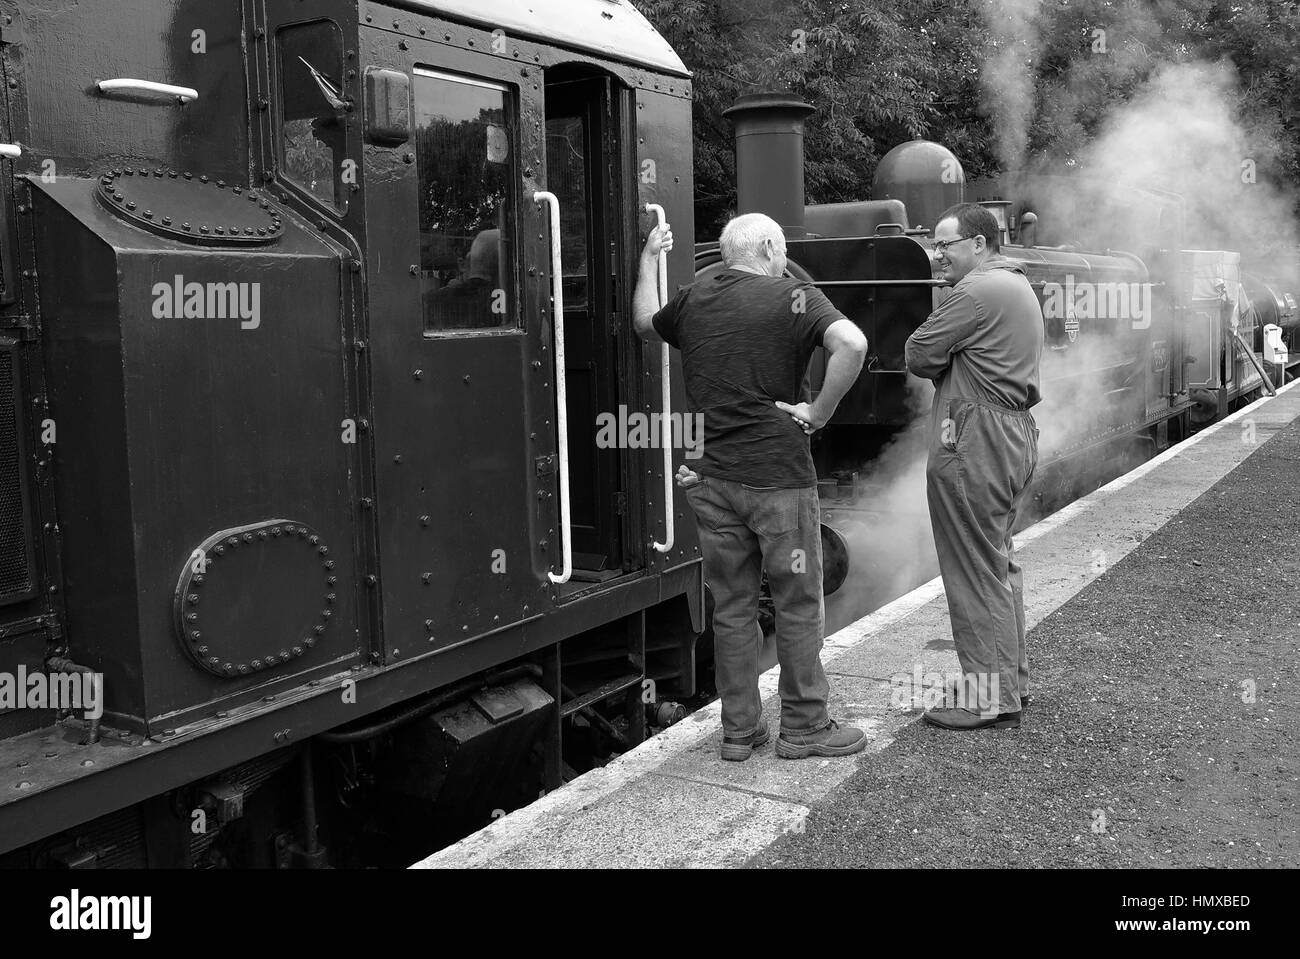 Walllingford Oxford UK Volunteers at the Cholsey and Wallingford heritage railway working and preparing steam trains. Stock Photo